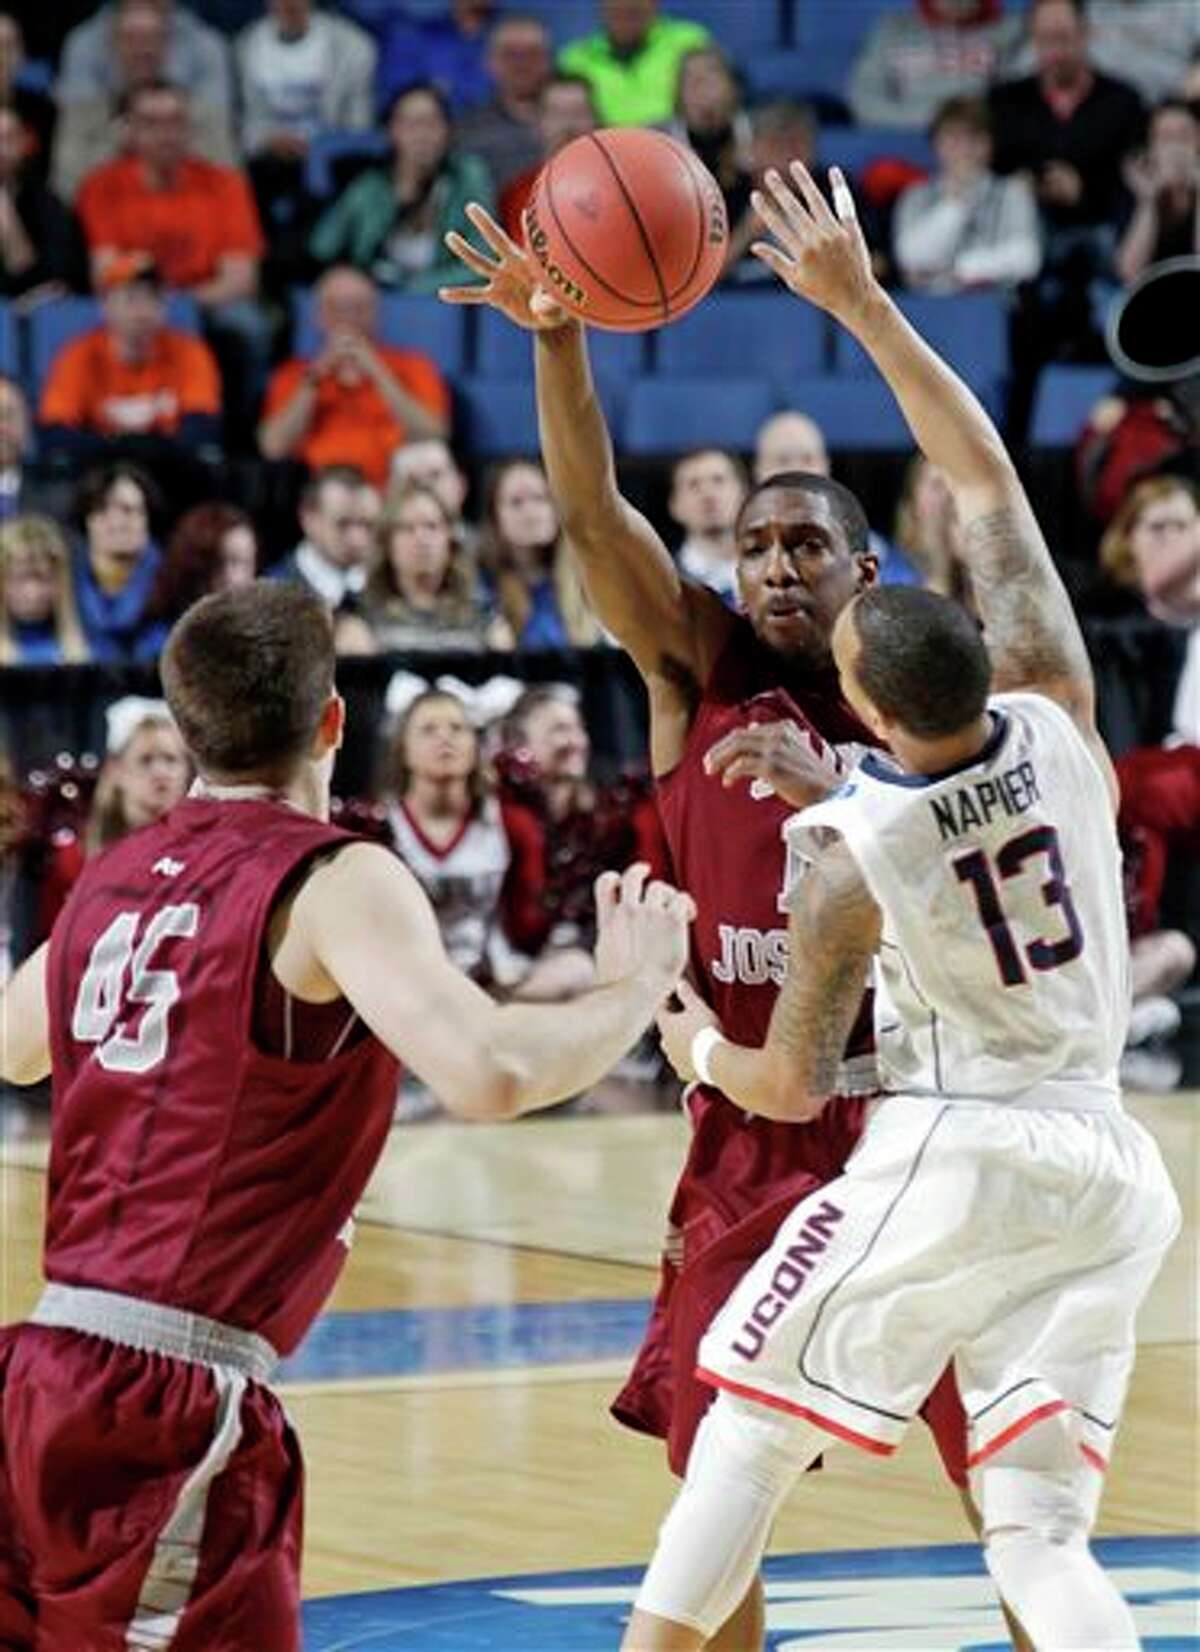 Saint Joseph's Ronald Roberts, Jr., center, passes the ball away from Connecticut's Shabazz Napier (13) to teammate Halil Kanacevic (45) during the first half of a second-round game in the NCAA college basketball tournament in Buffalo, N.Y., Thursday, March 20, 2014. (AP Photo/Bill Wippert)